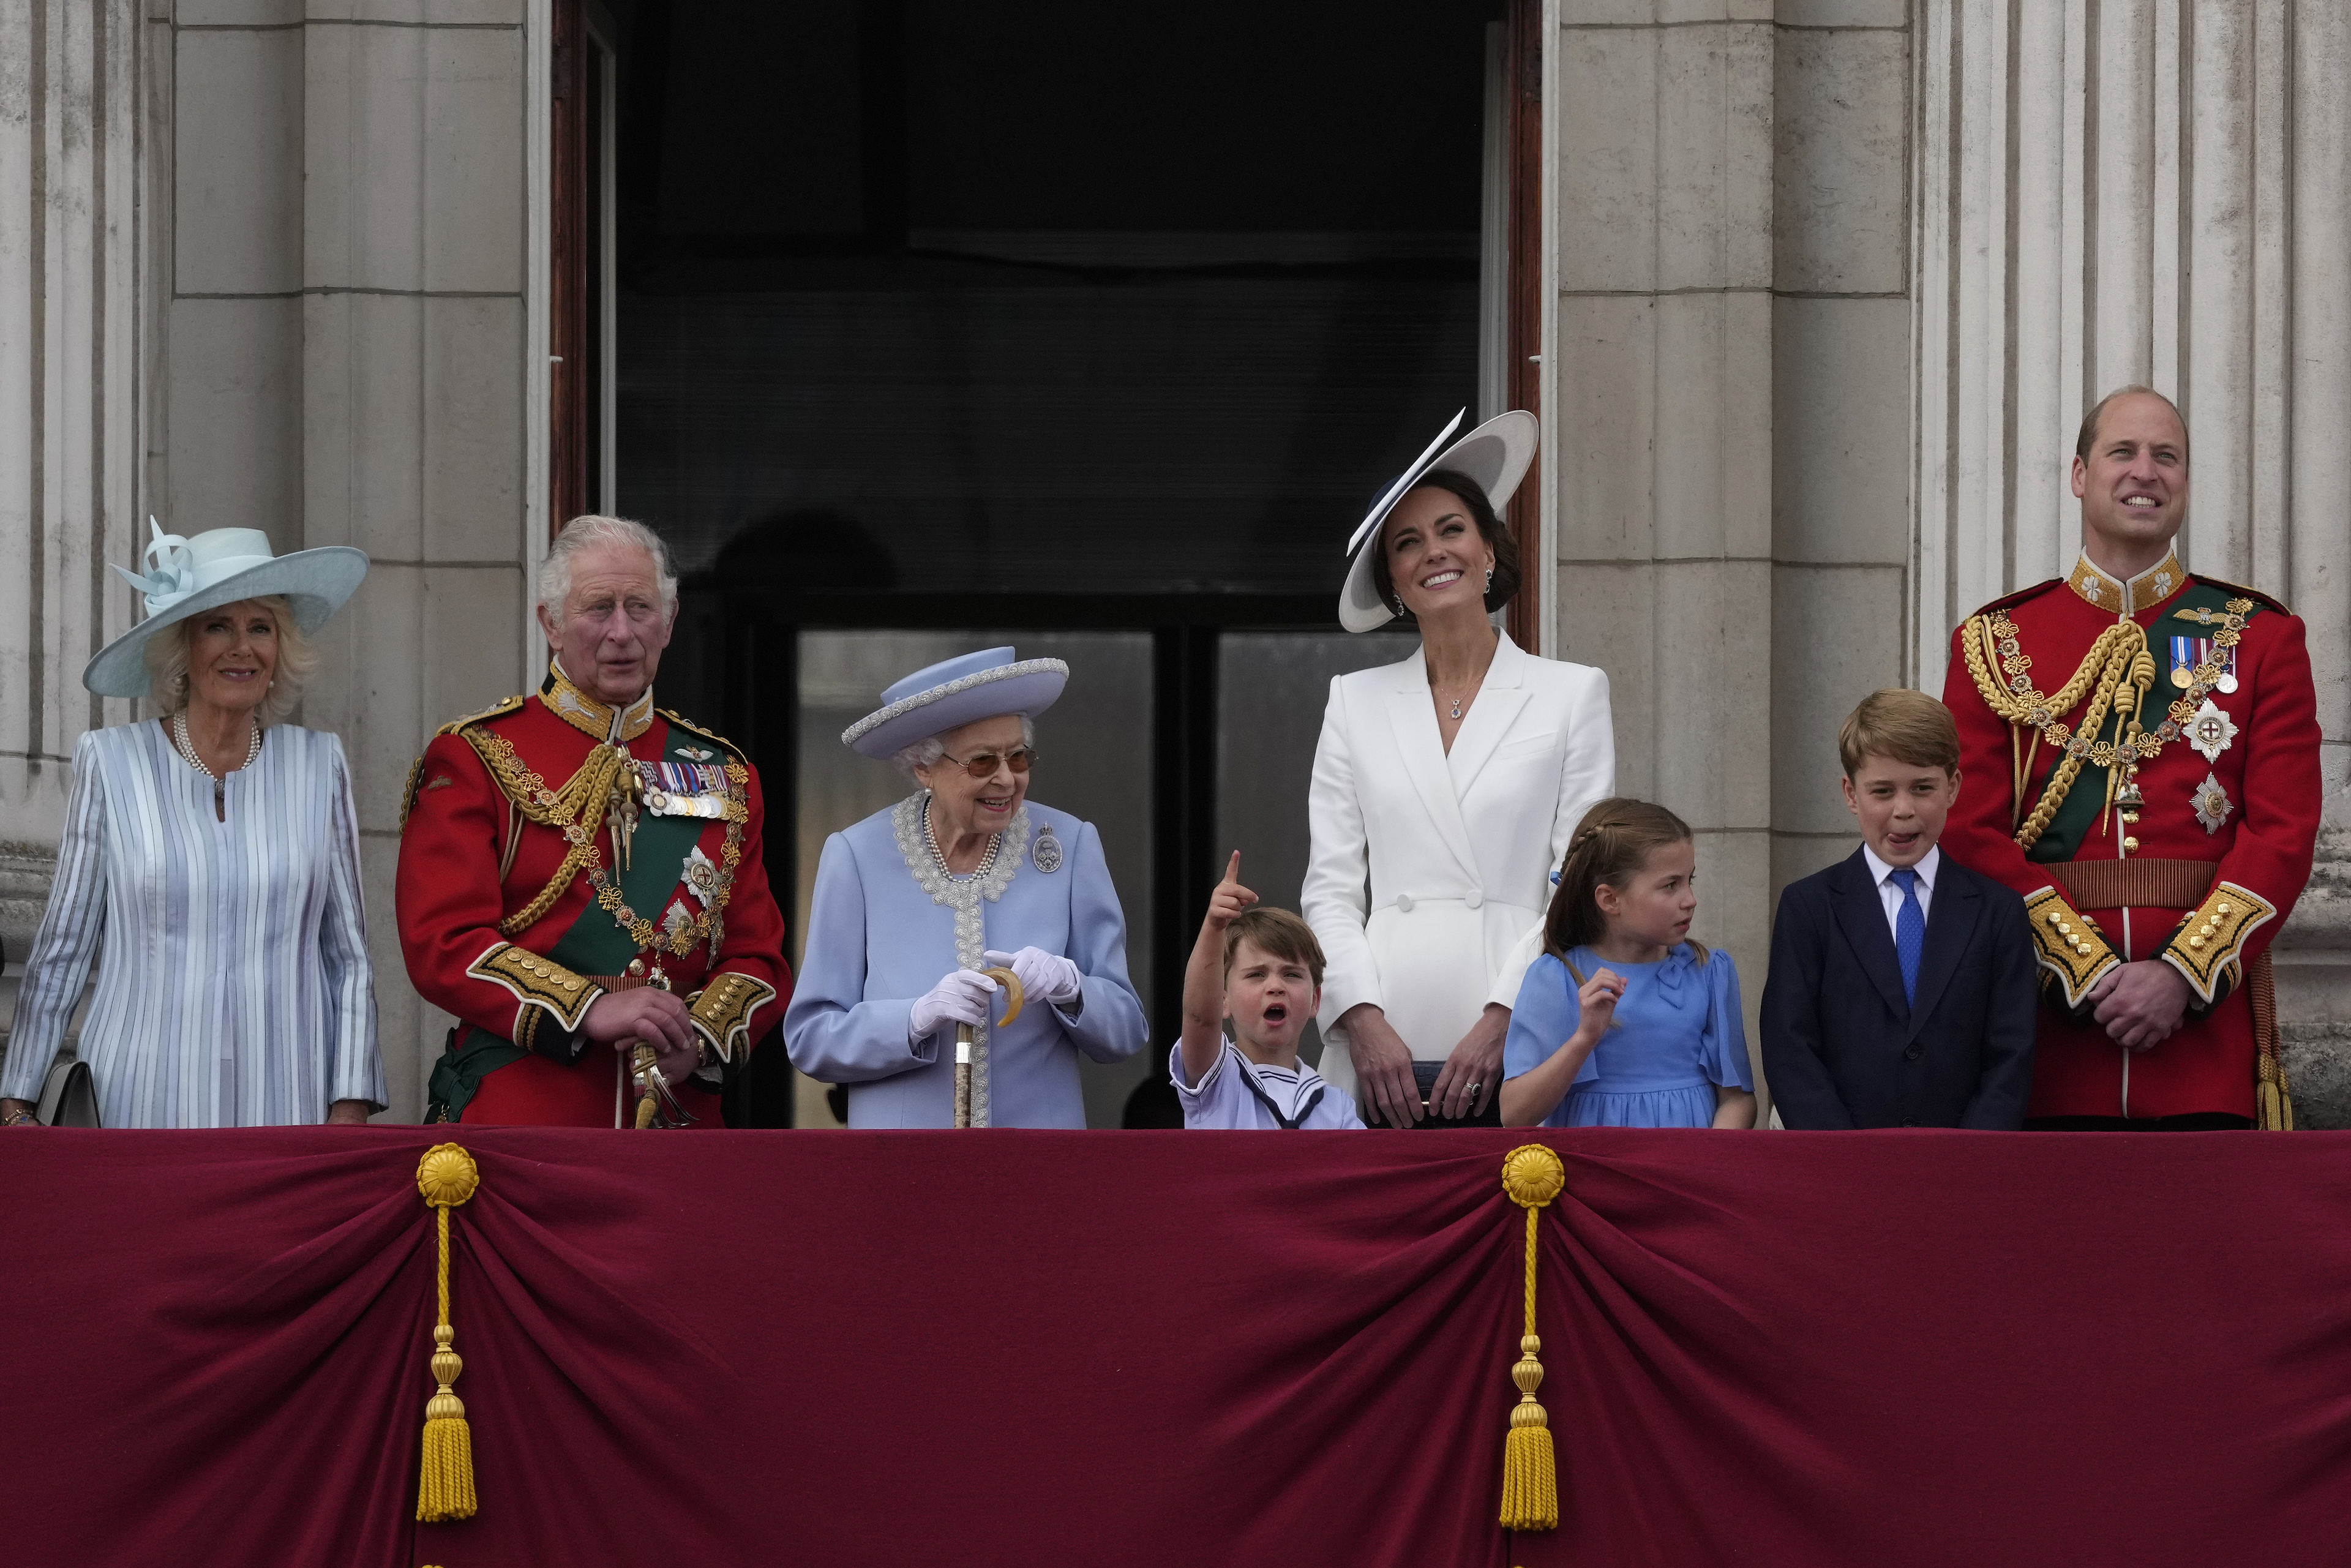 Charles becomes king of Britain after Queen Elizabeth's death; here's who's  in the line of succession - The Boston Globe